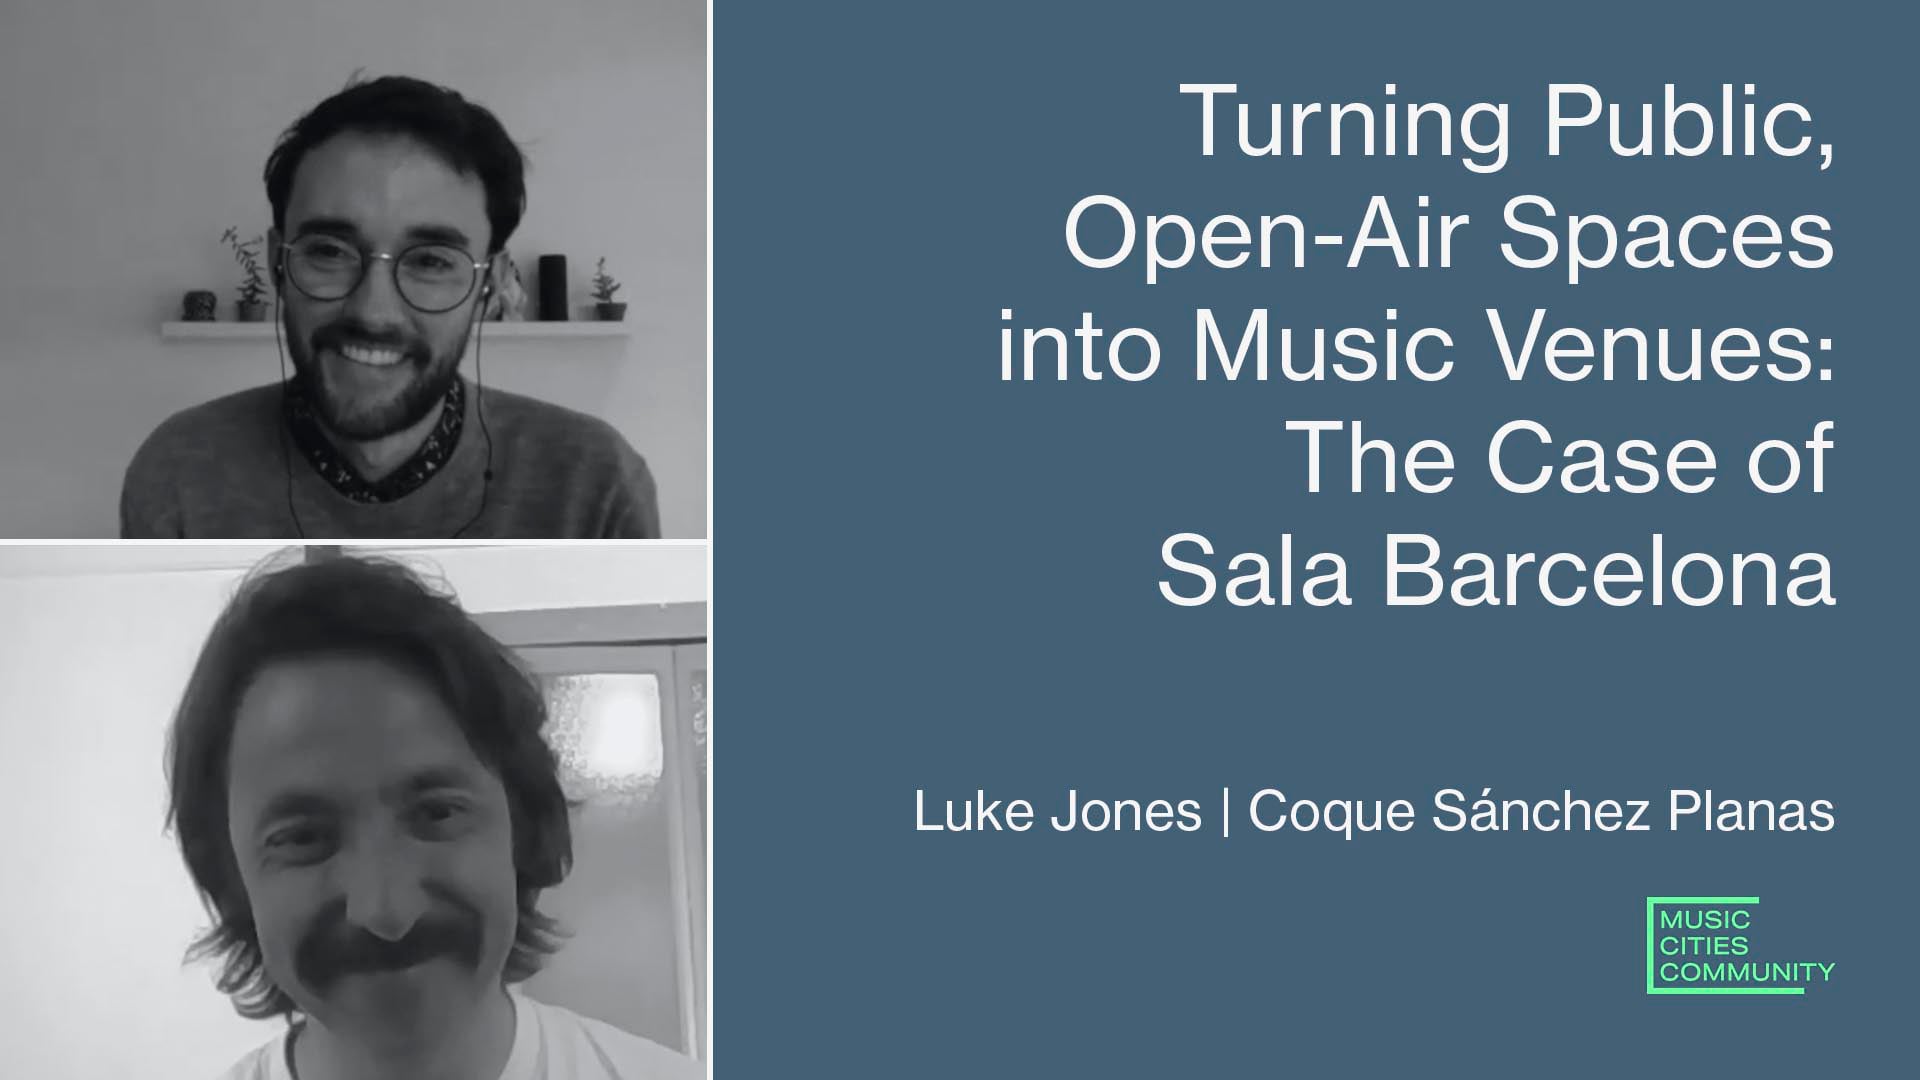 Turning Public, Open-Air Spaces into Music Venues: The Case of Sala Barcelona